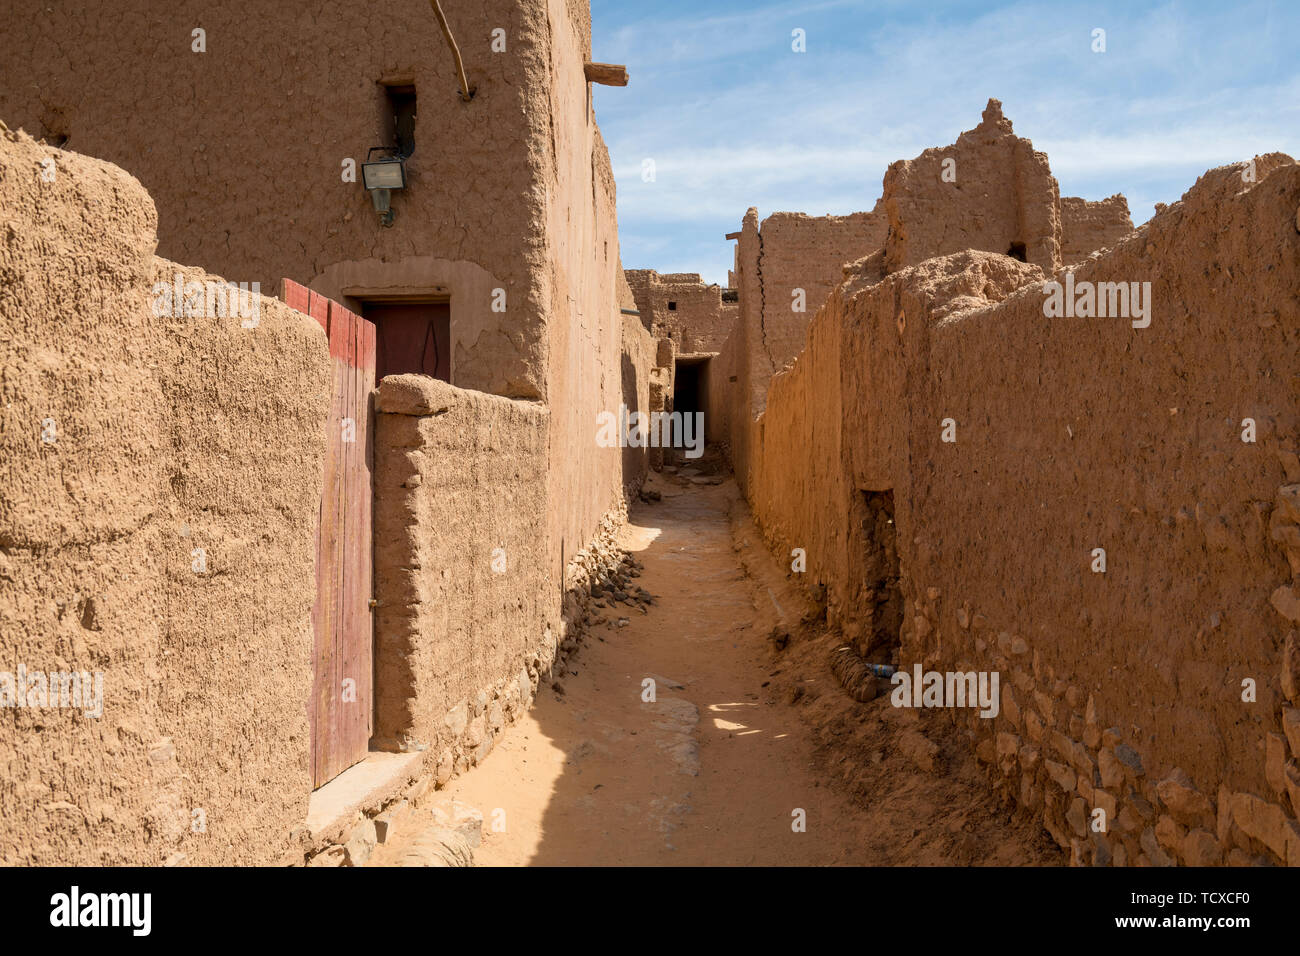 Old kasbah, old town, Oasis of Taghit, western Algeria, North Africa, Africa Stock Photo